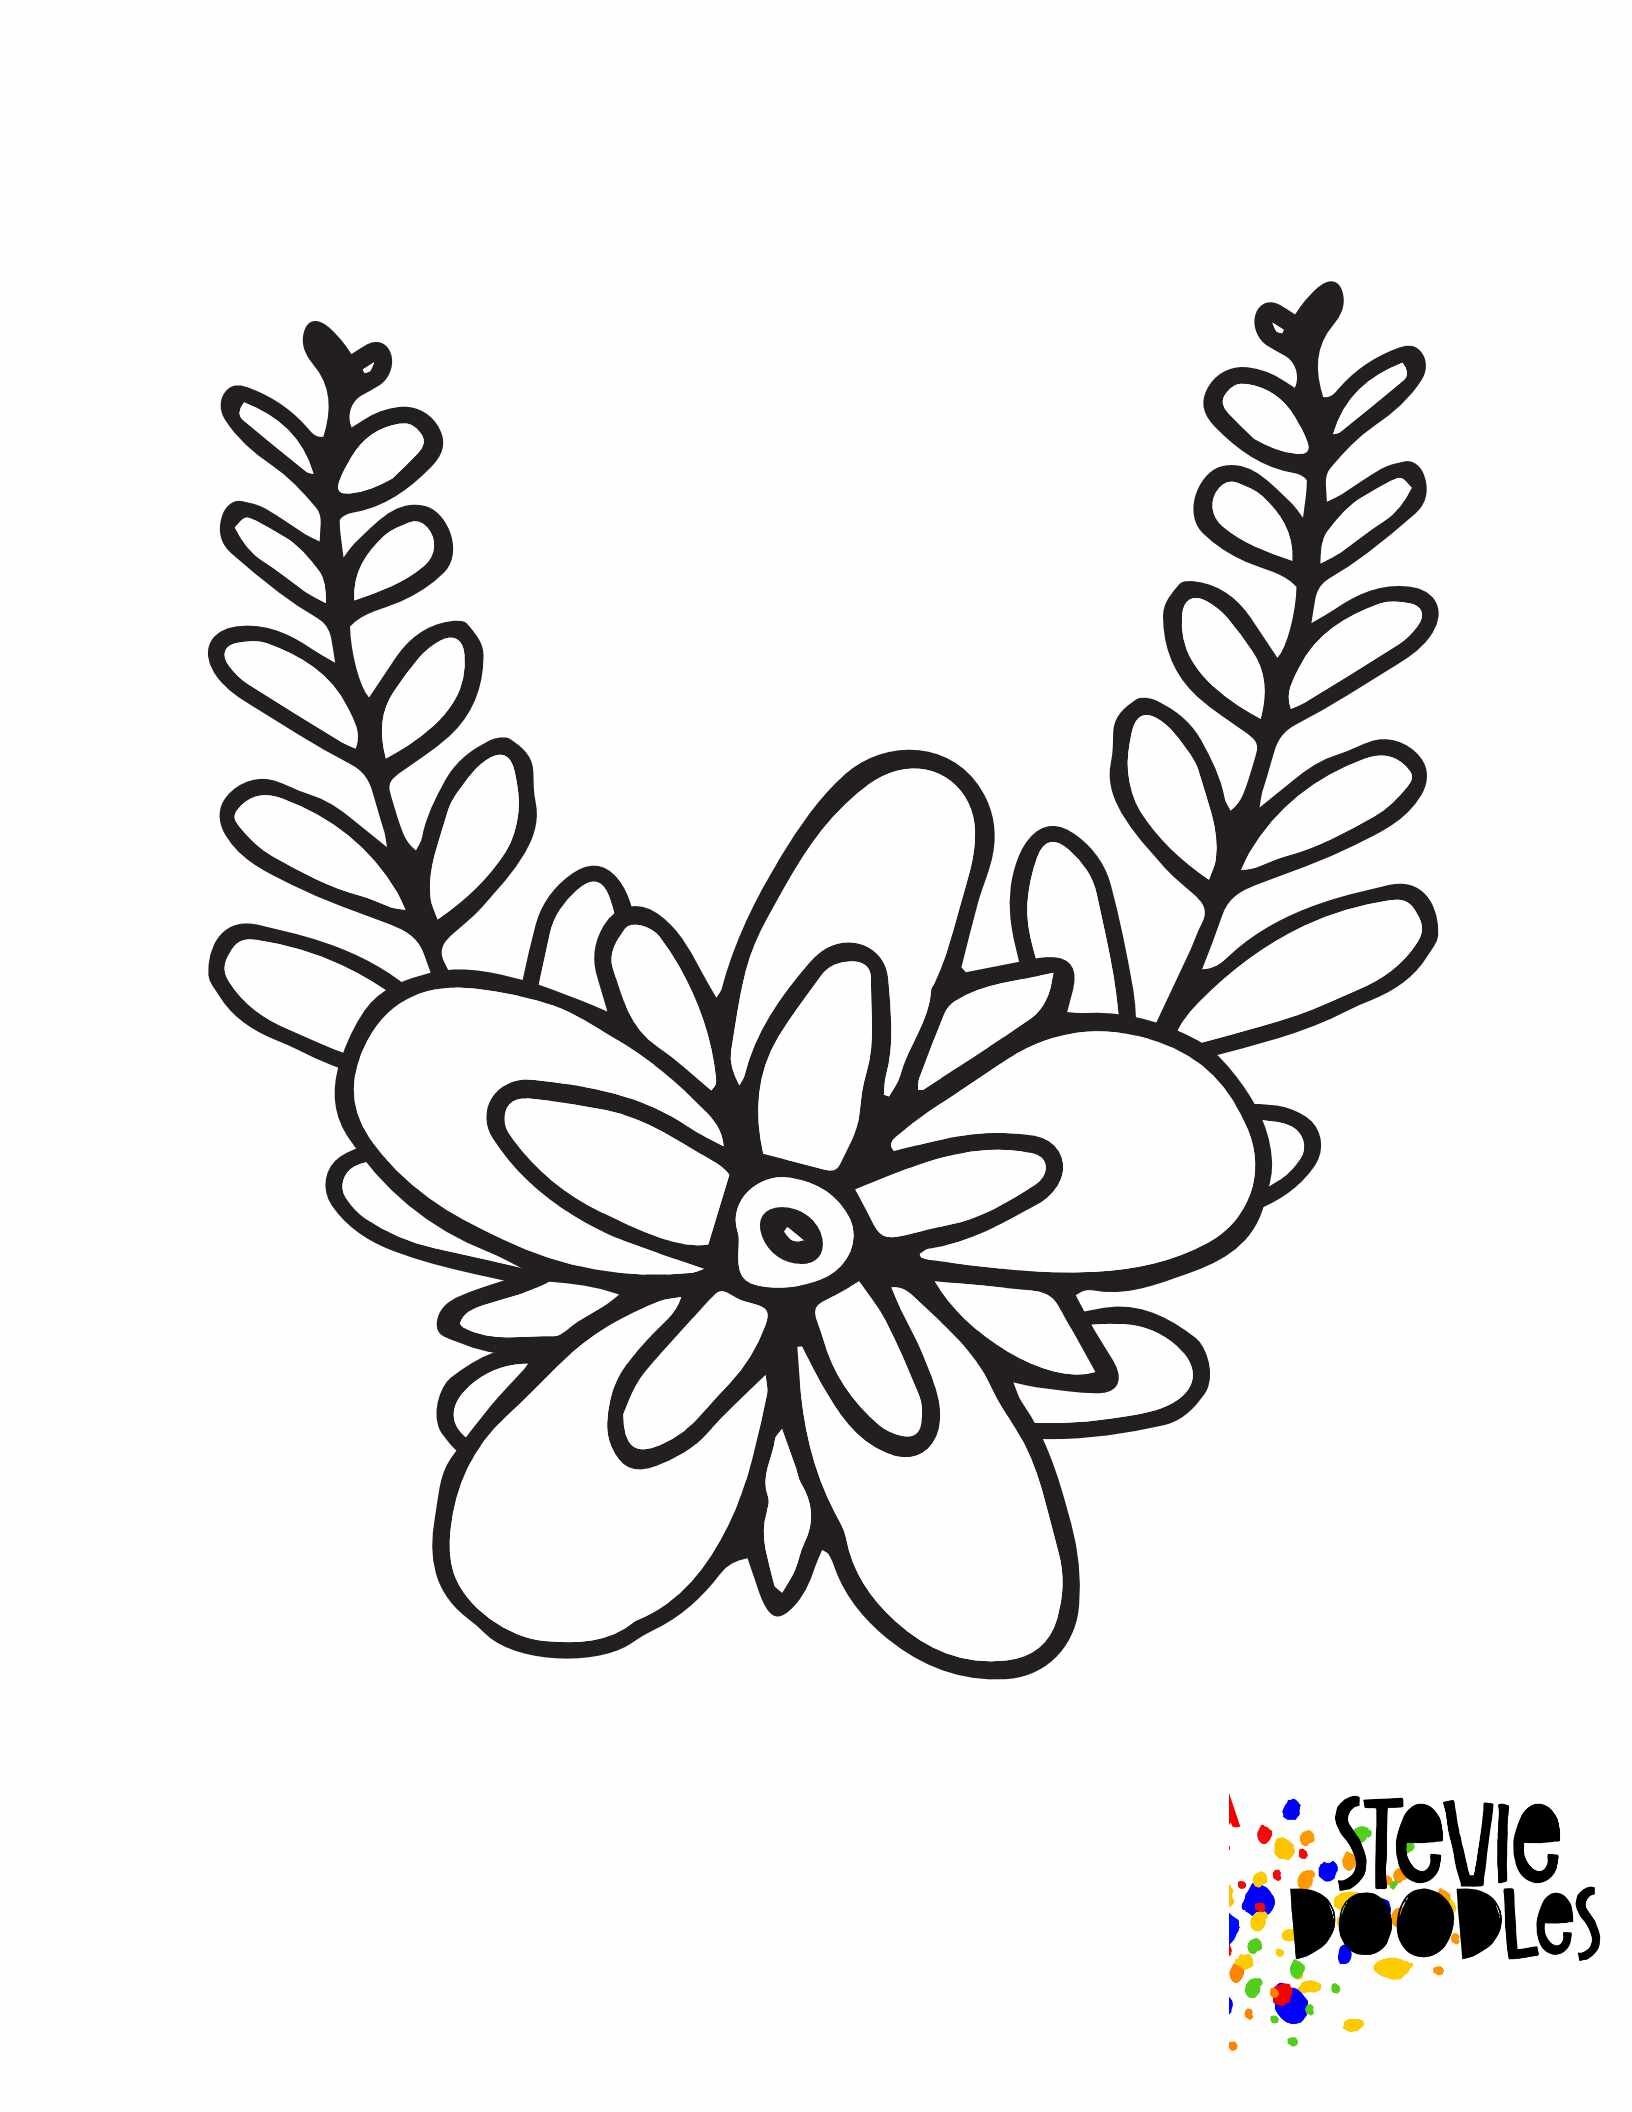 flower coloring page with one big flower and ferns coming out of it